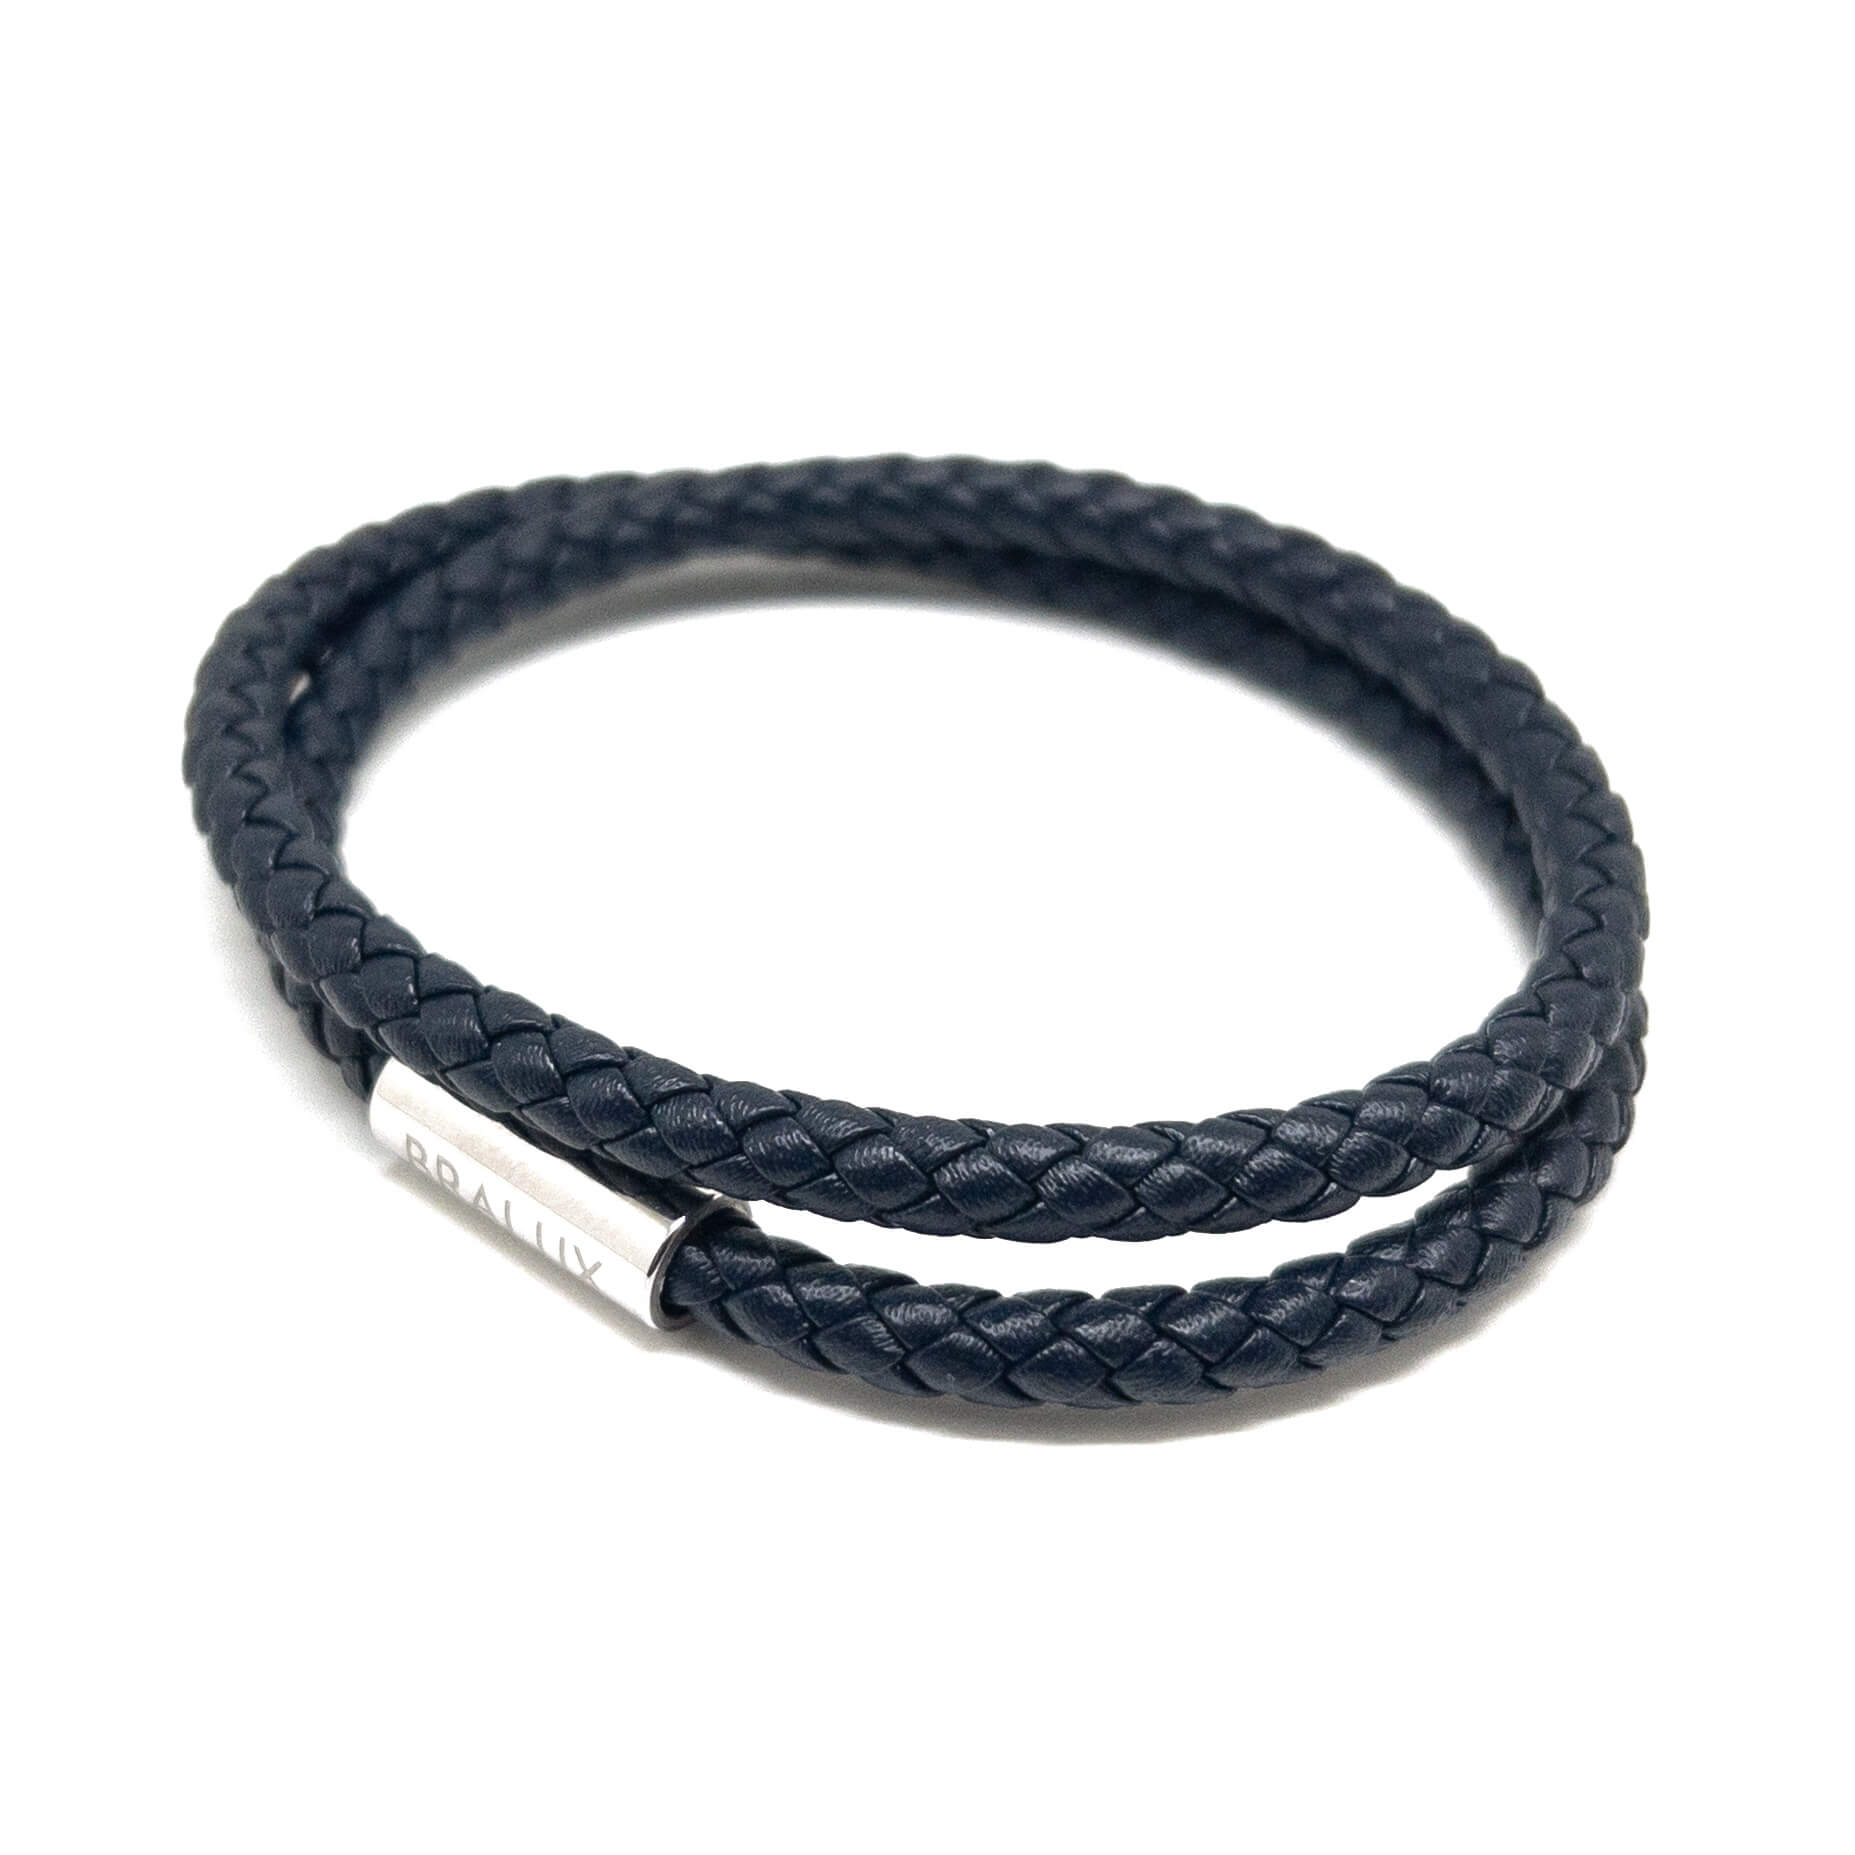 The Navy duo leather bracelet